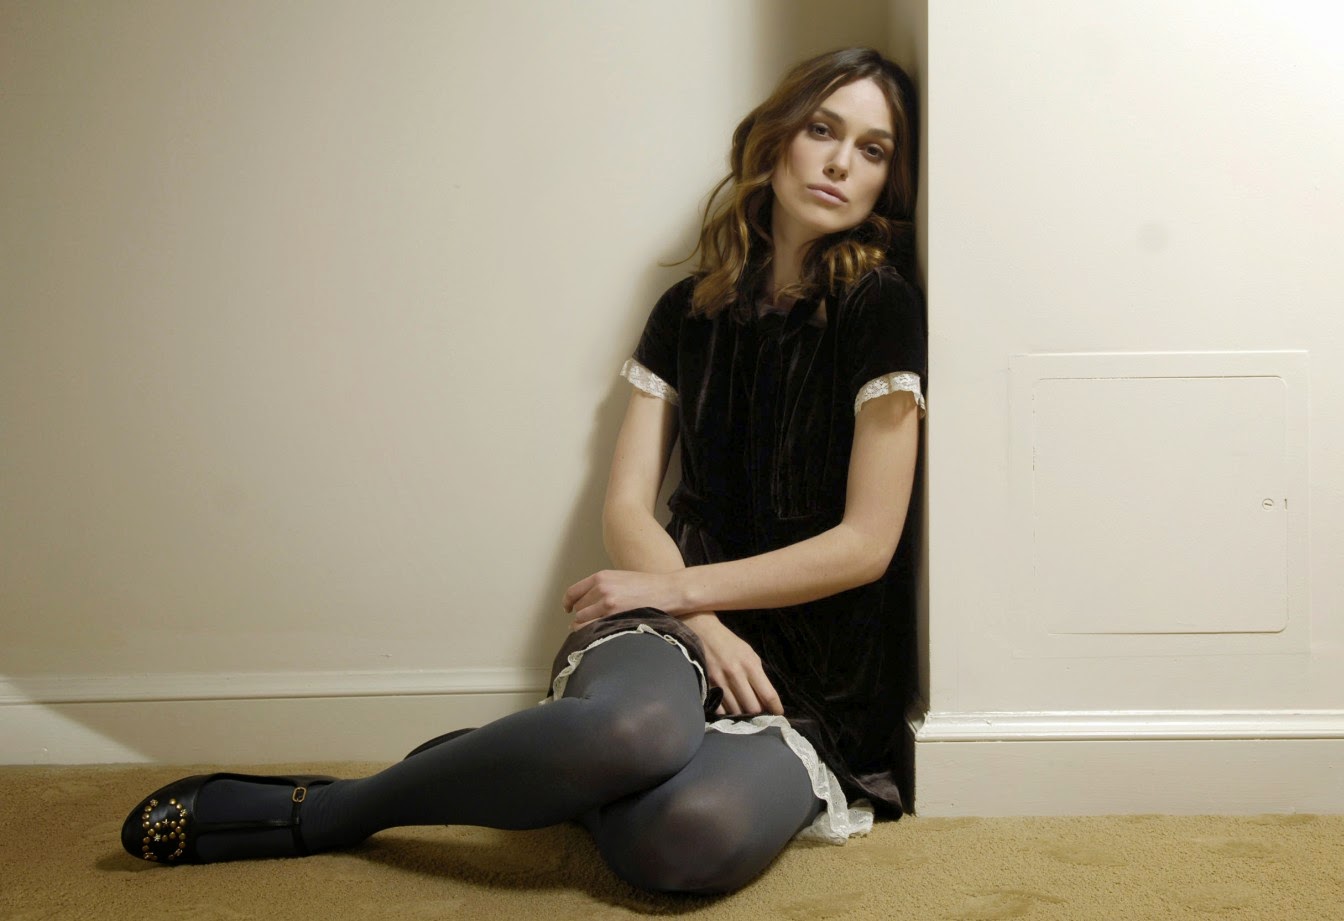 Celebrity Legs And Feet In Tights Keira Knightley S Legs And Feet In